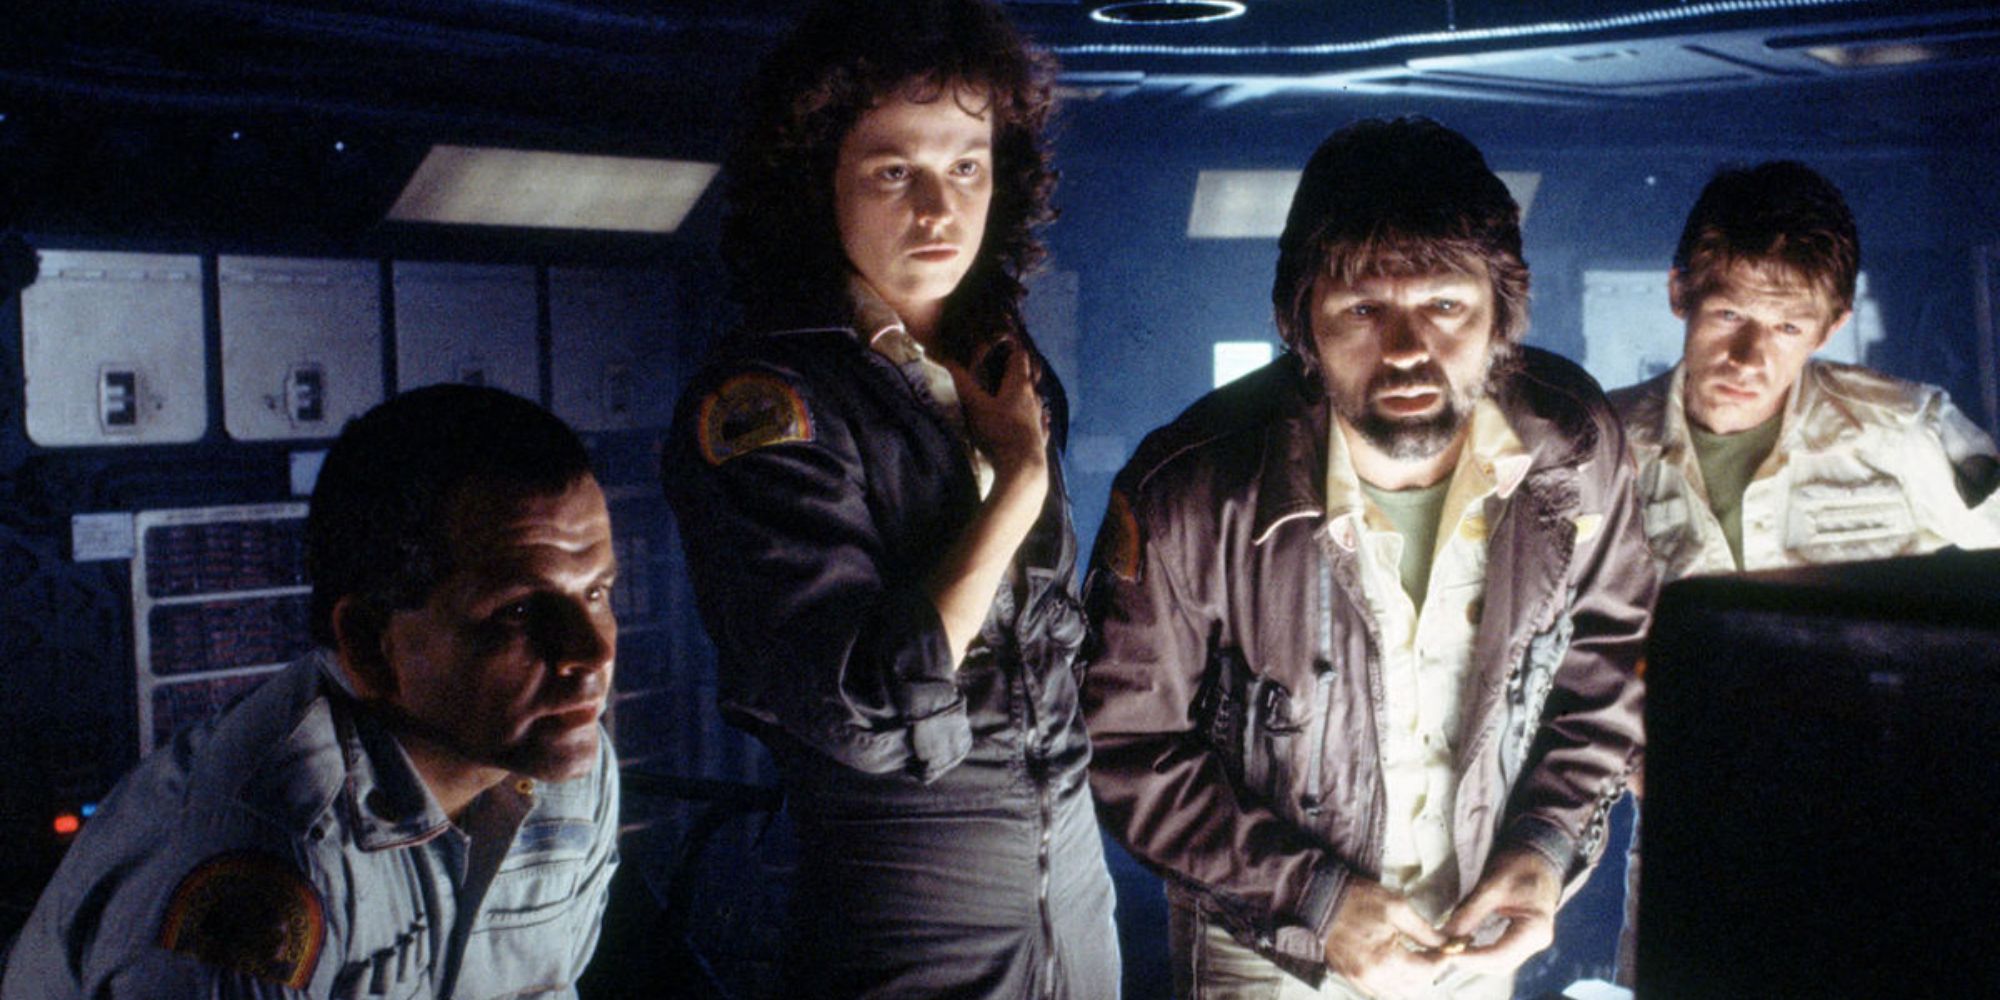 The cast of Alien watching a monitor